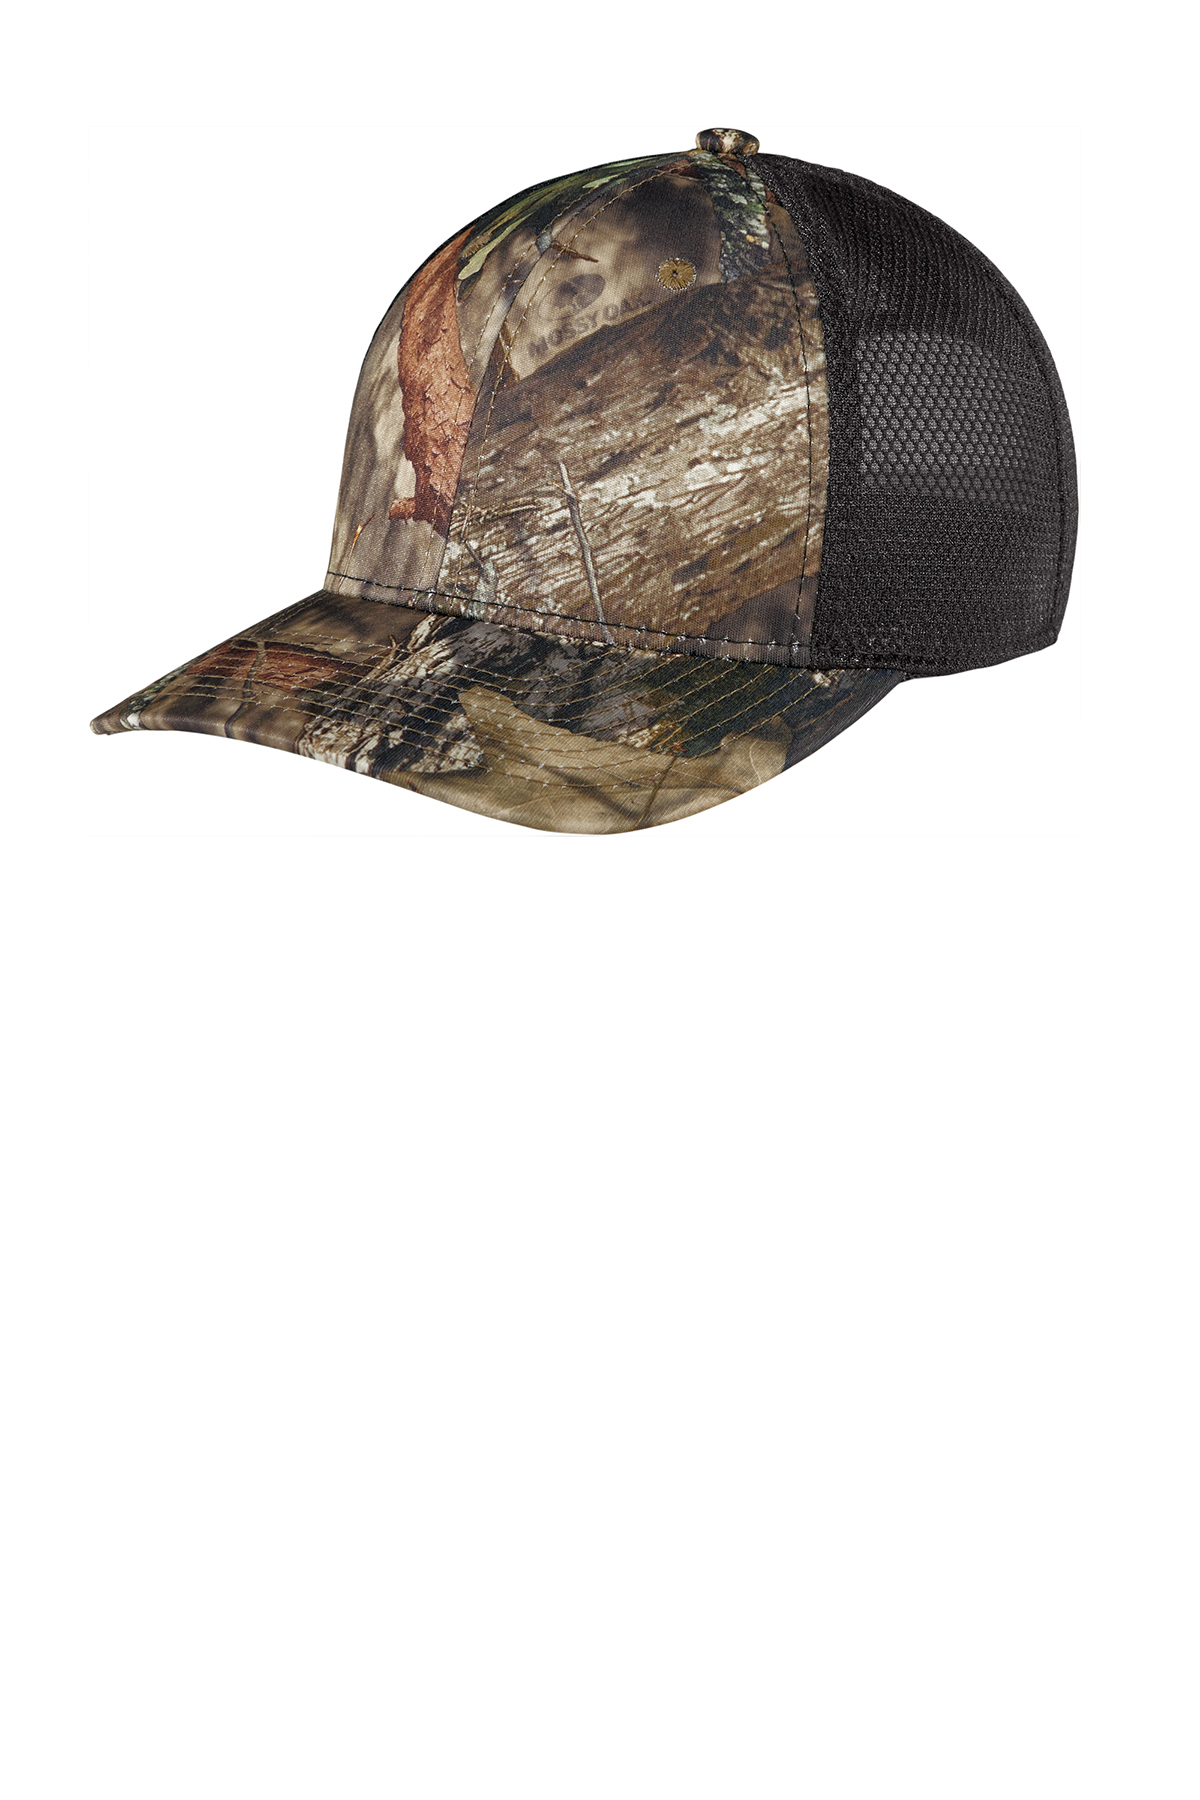 click to view Mossy Oak Break-Up Country/ Black